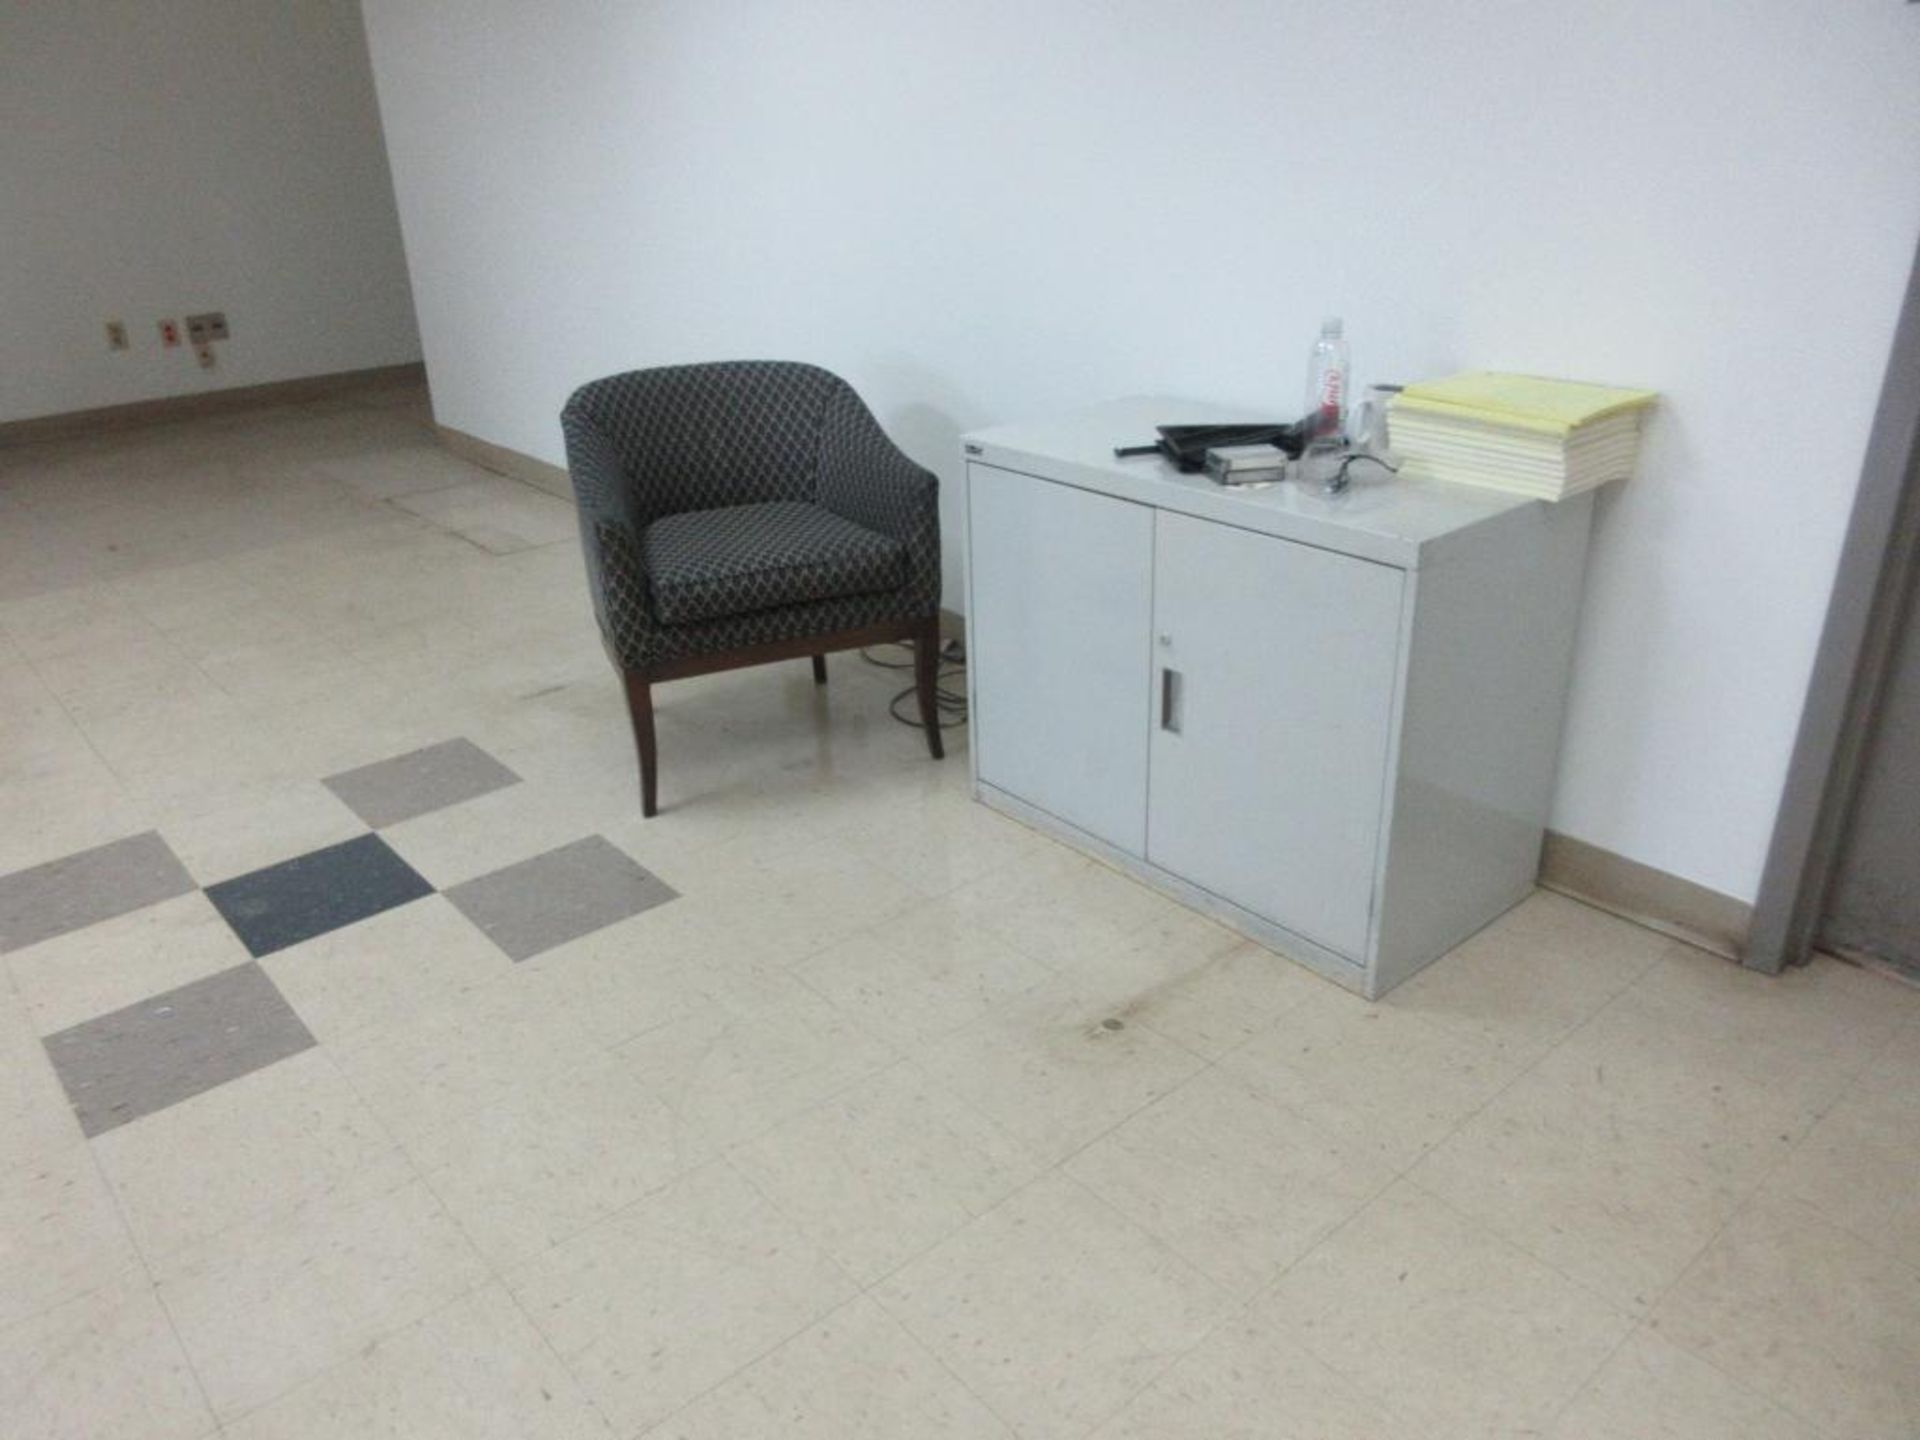 CONTENTS OF WORK AREA INCL 2 DESKS, 9 CHAIRS, 4 FILE CABINETS (OFFICES 2ND FLOOR) - Image 8 of 8